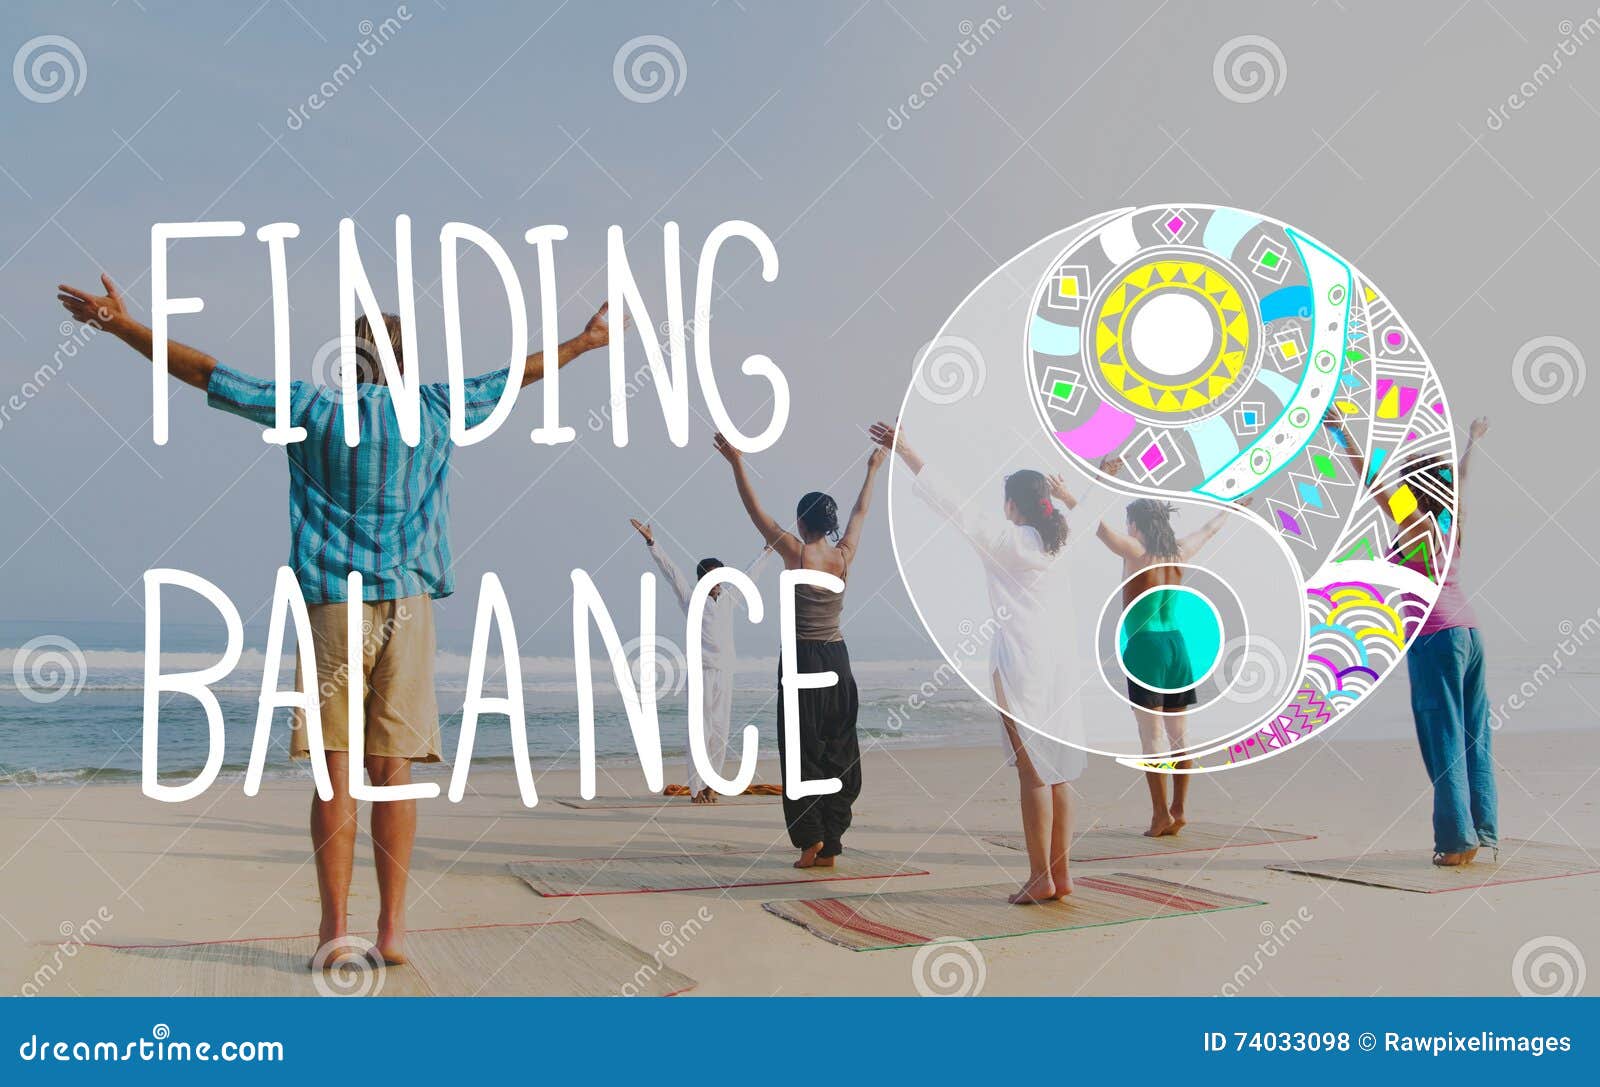 finding balance yin-yang wellbeing concept